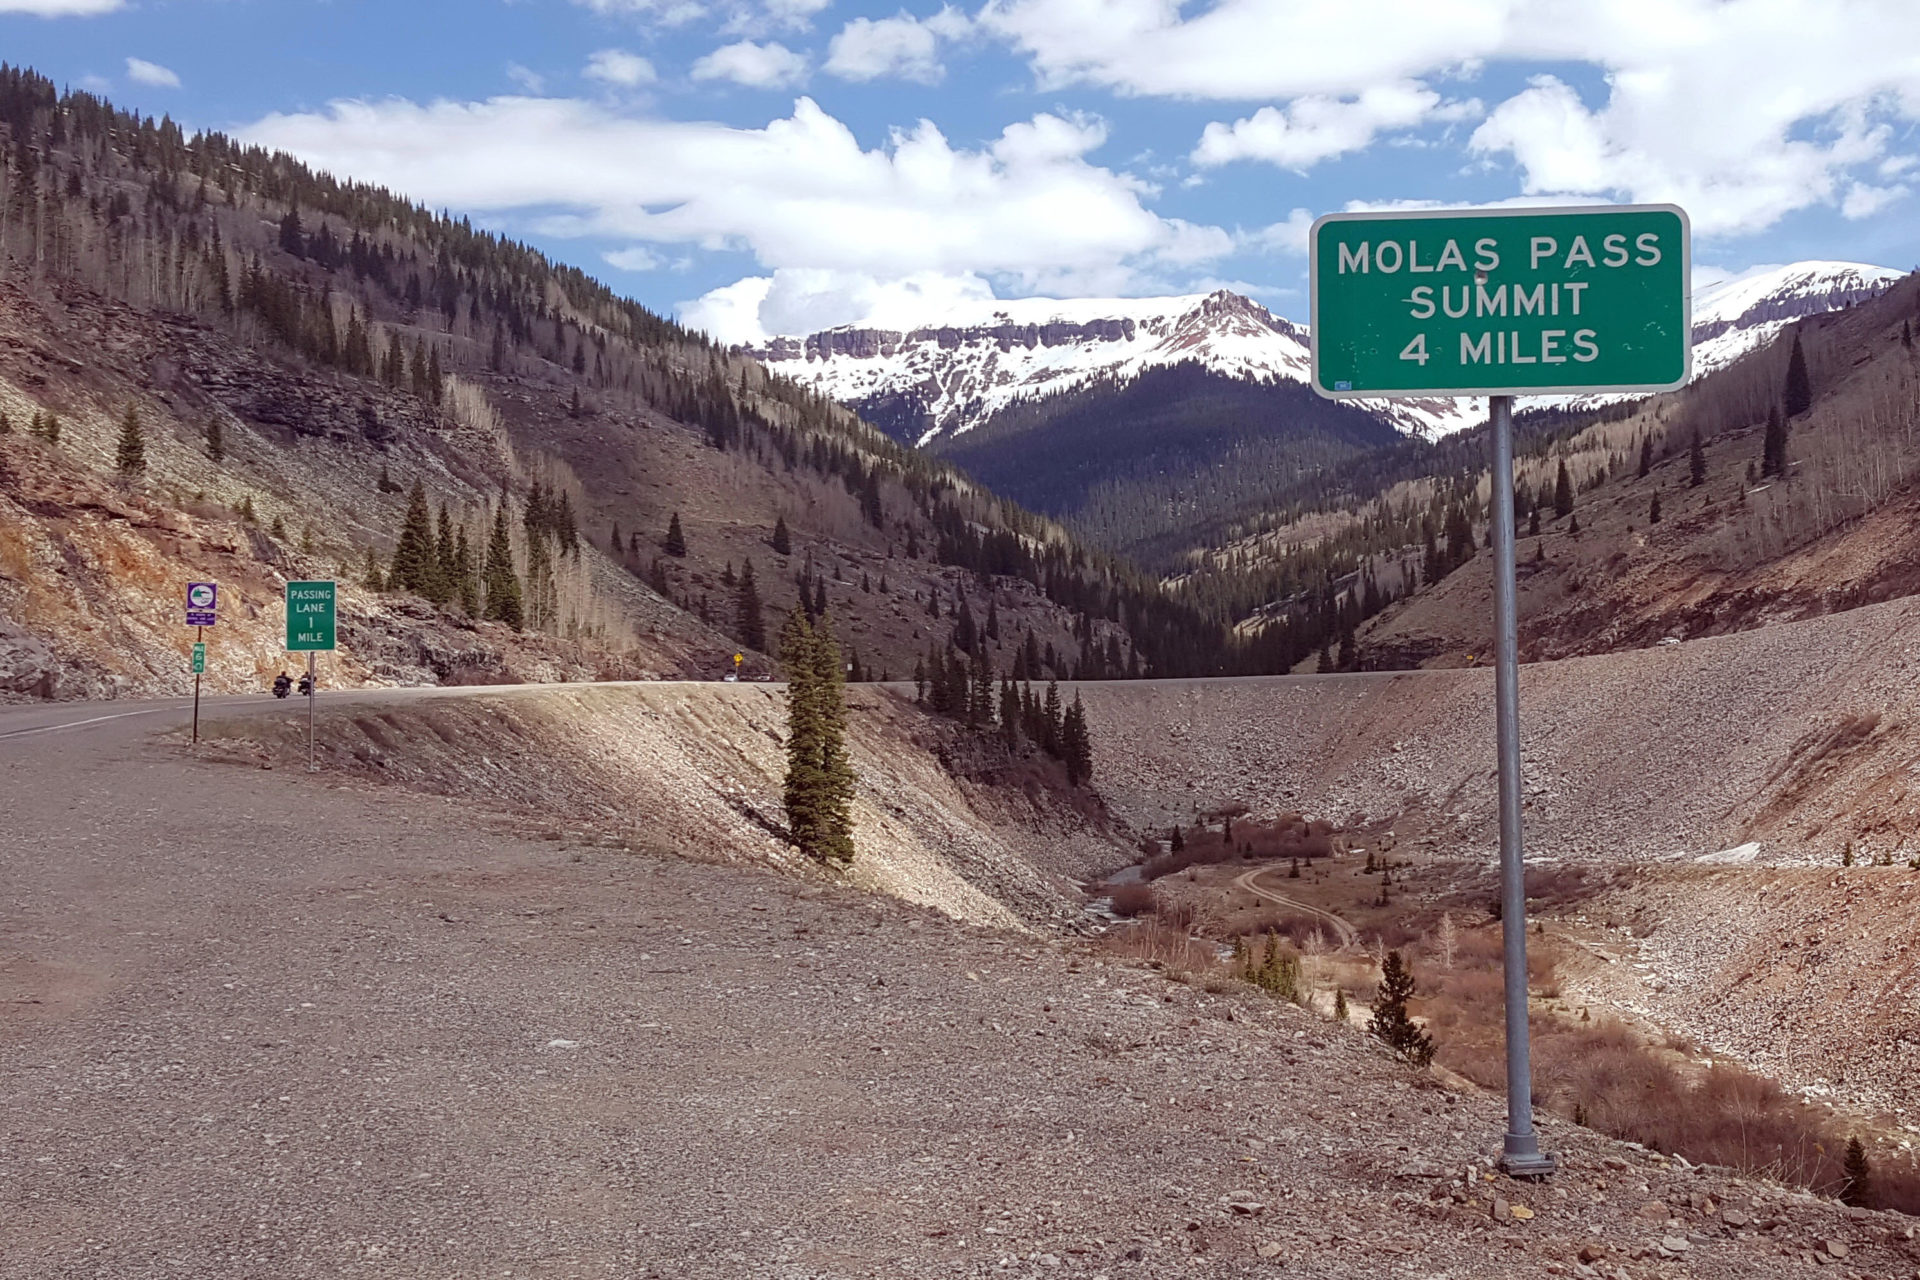 A sign on the side of a mountain road reading "Molas pass summit, 4 miles."